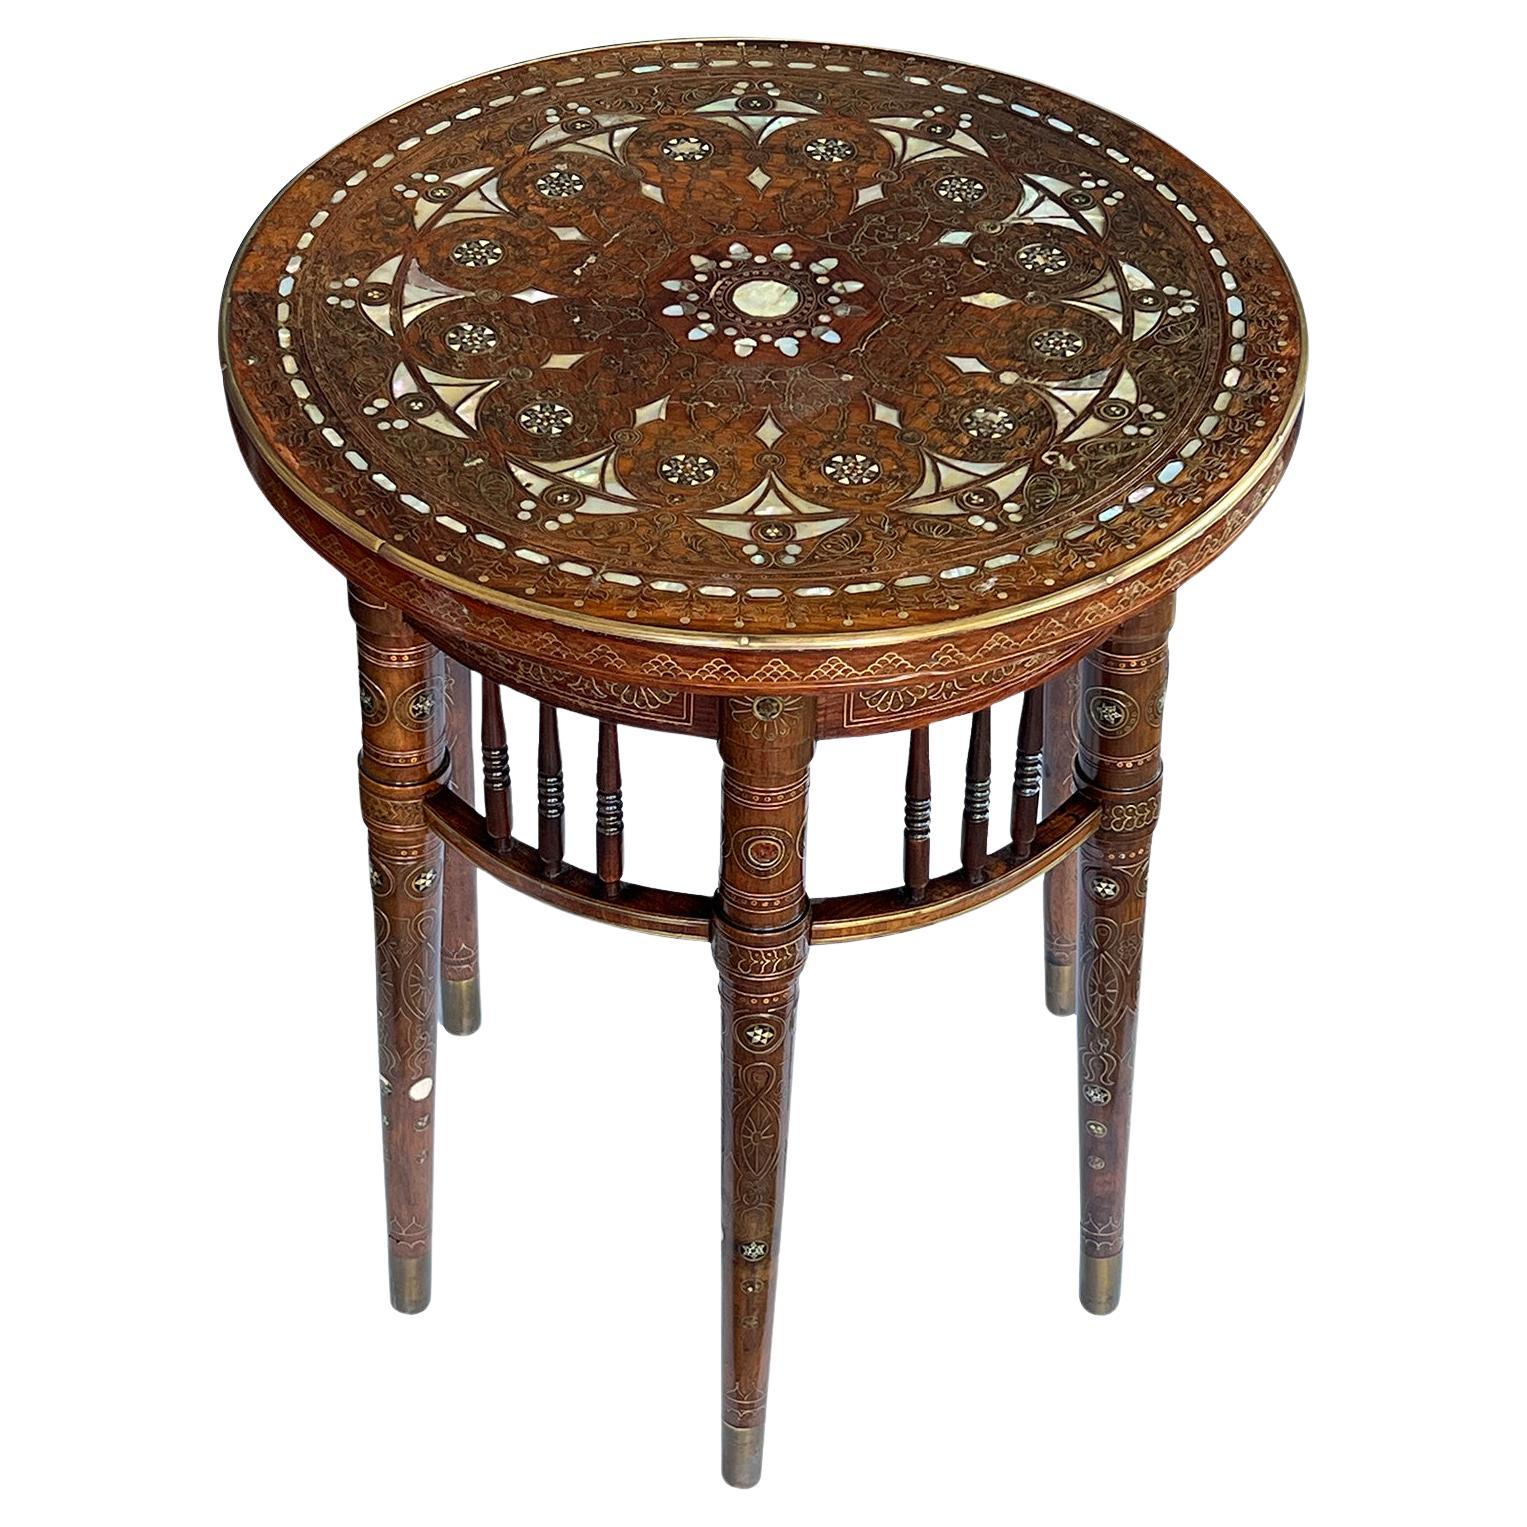 A Rare Anglo-Persian Inlaid Circular Occasional/Drinks Table 